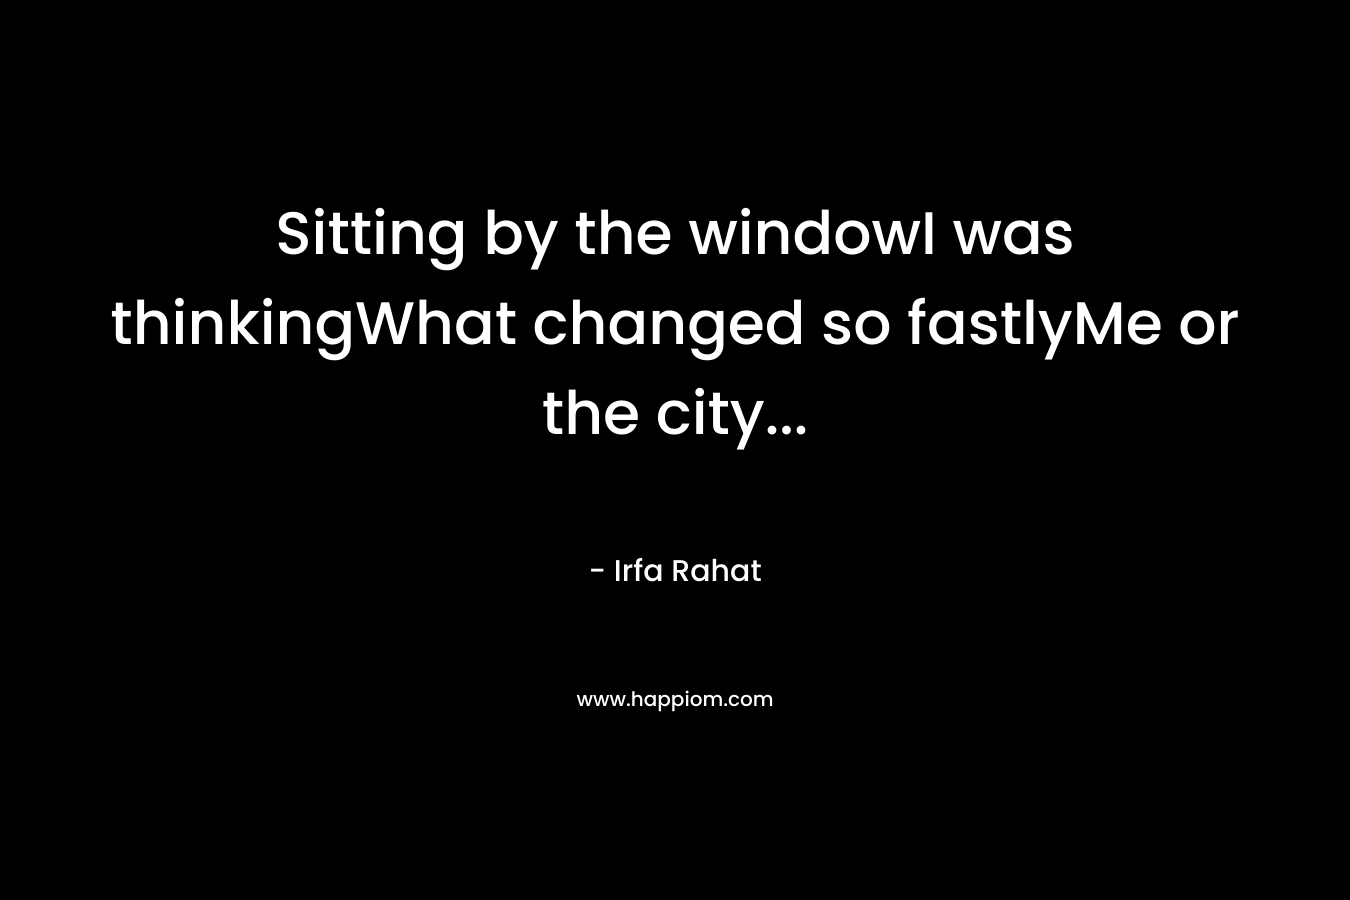 Sitting by the windowI was thinkingWhat changed so fastlyMe or the city...